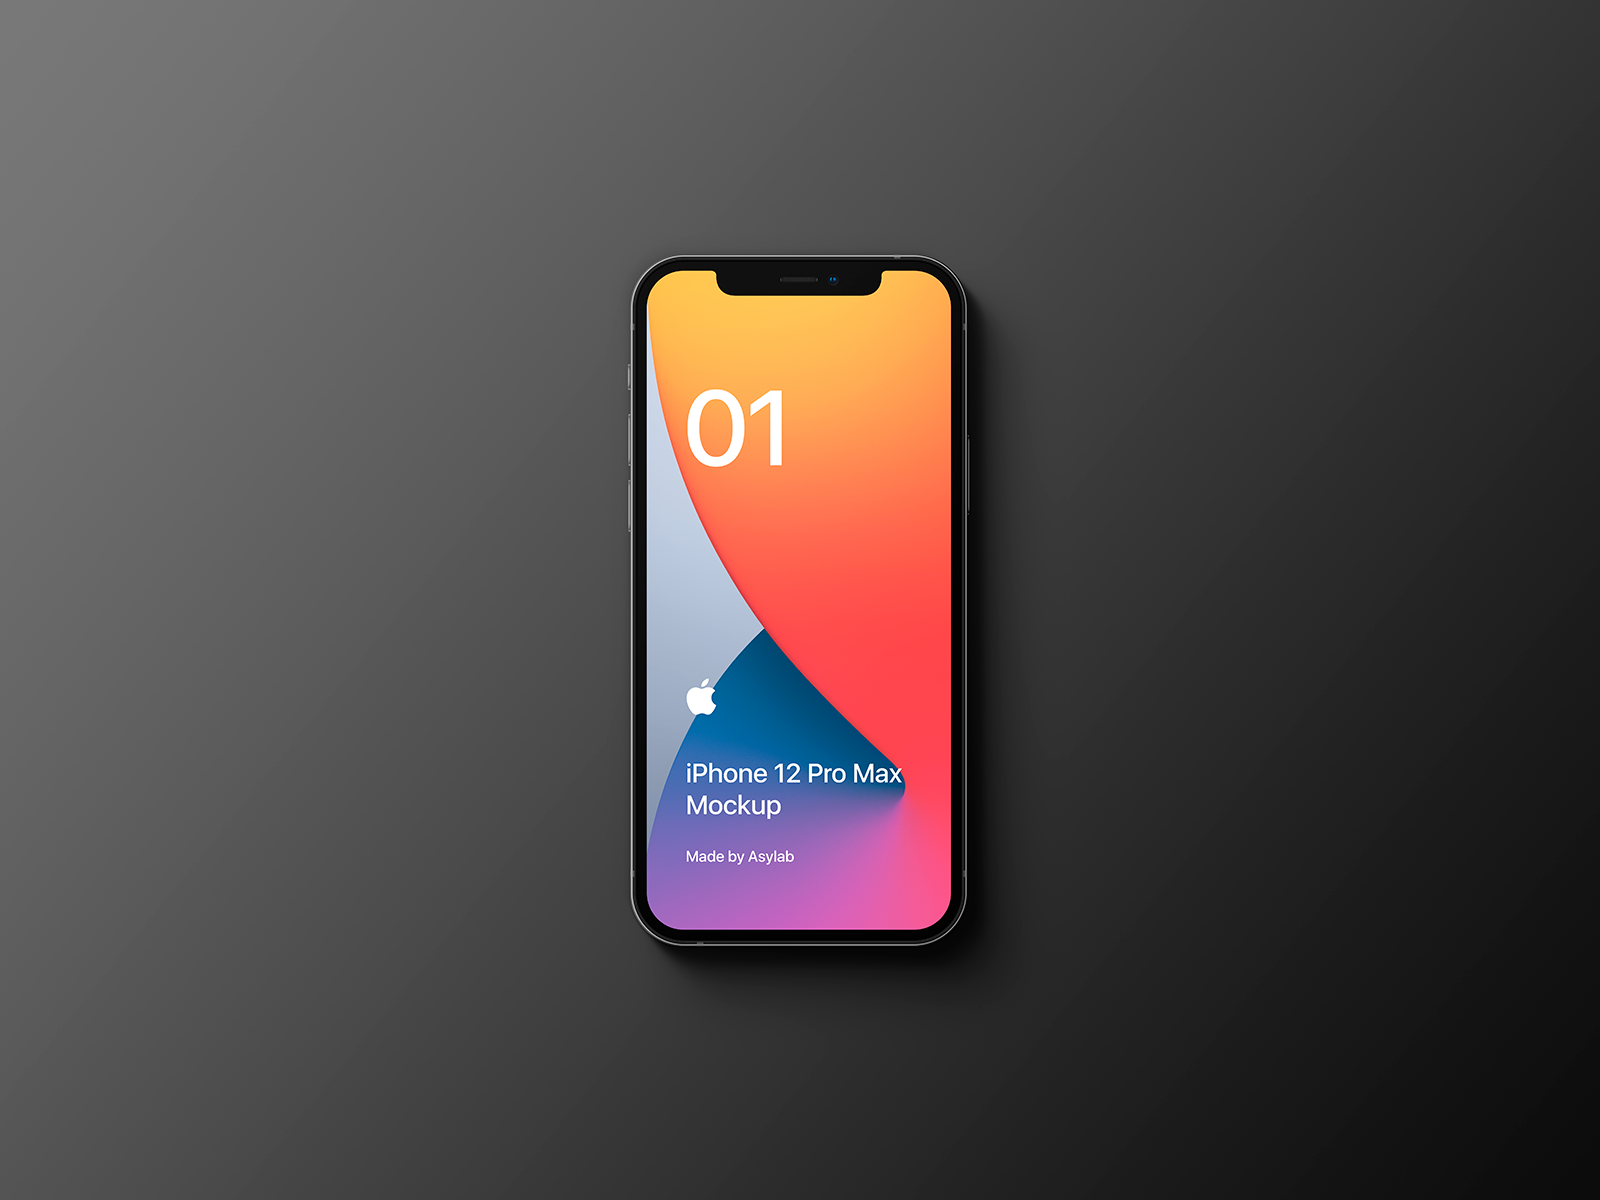 Download iPhone 12 Pro Free Mockup - PSD by Asylab on Dribbble